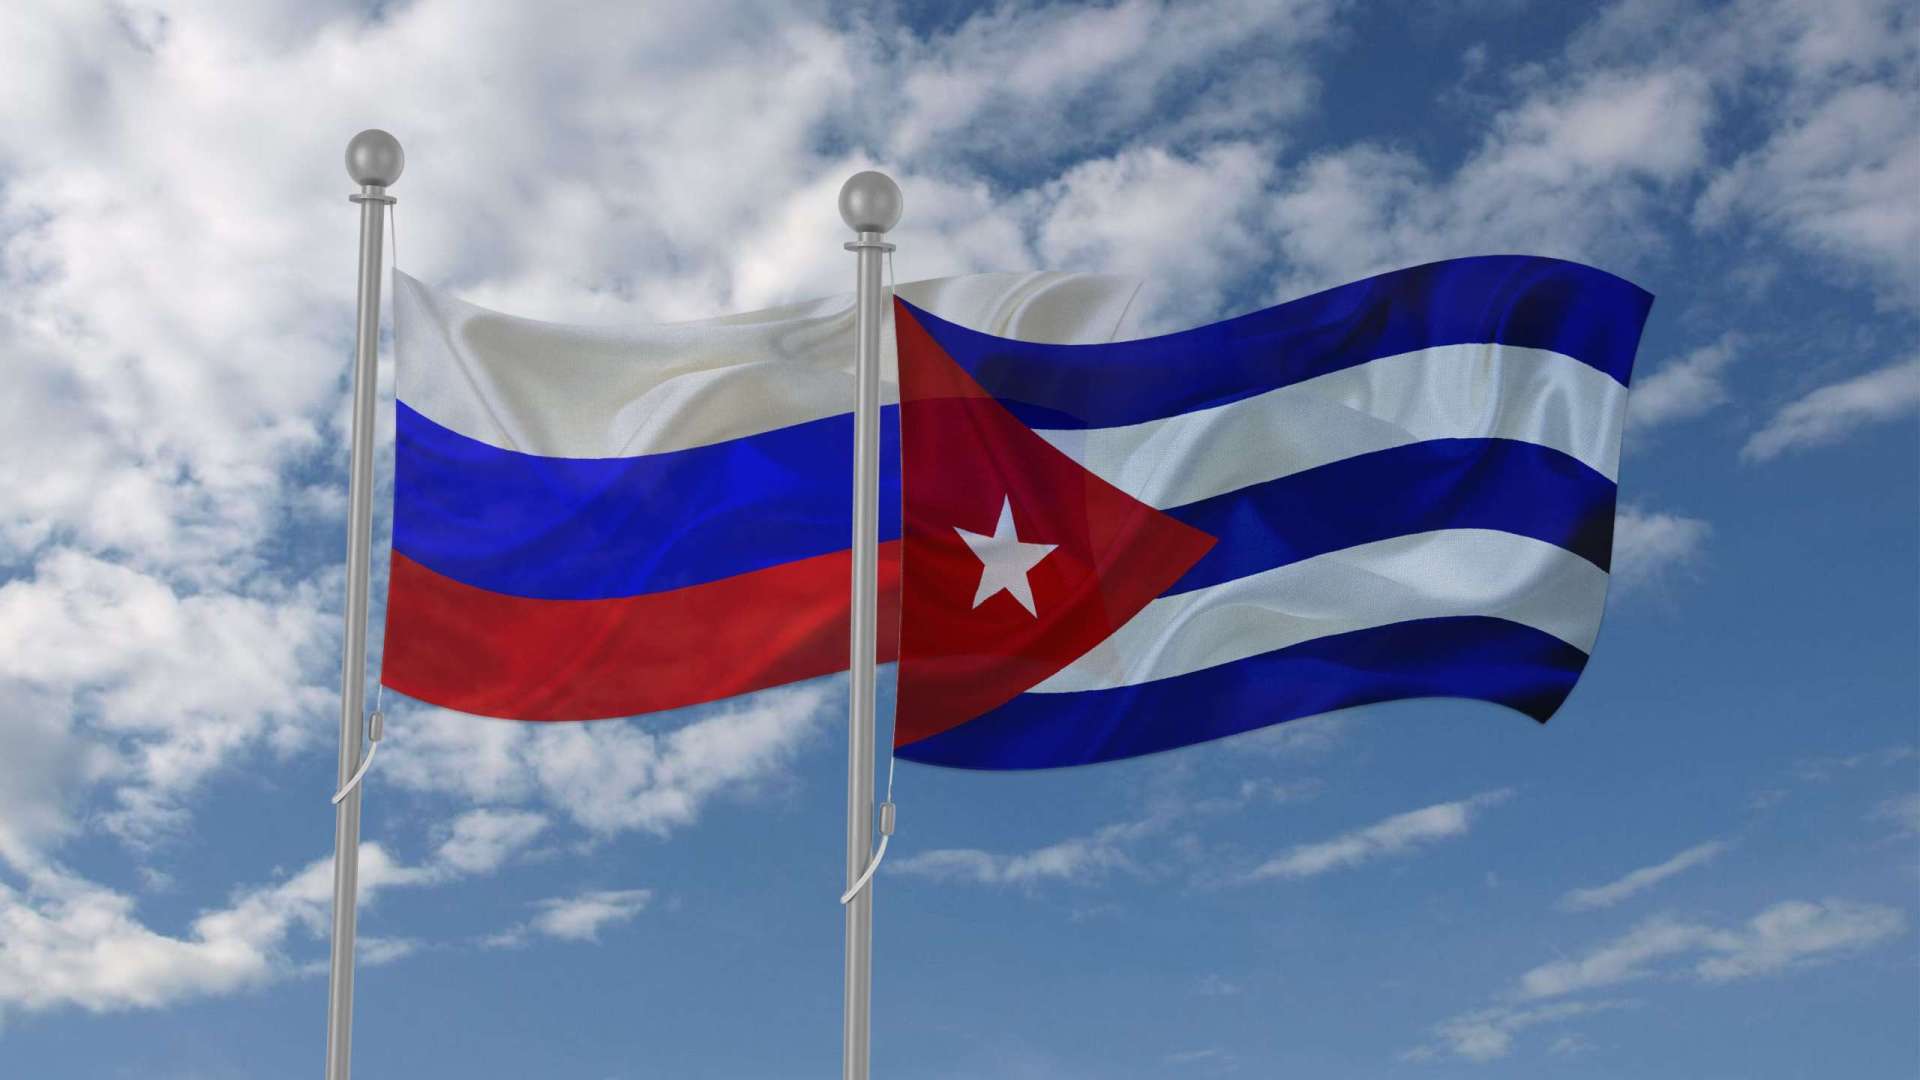 Cuba opportunity for more Russian medical travellers? LaingBuisson News